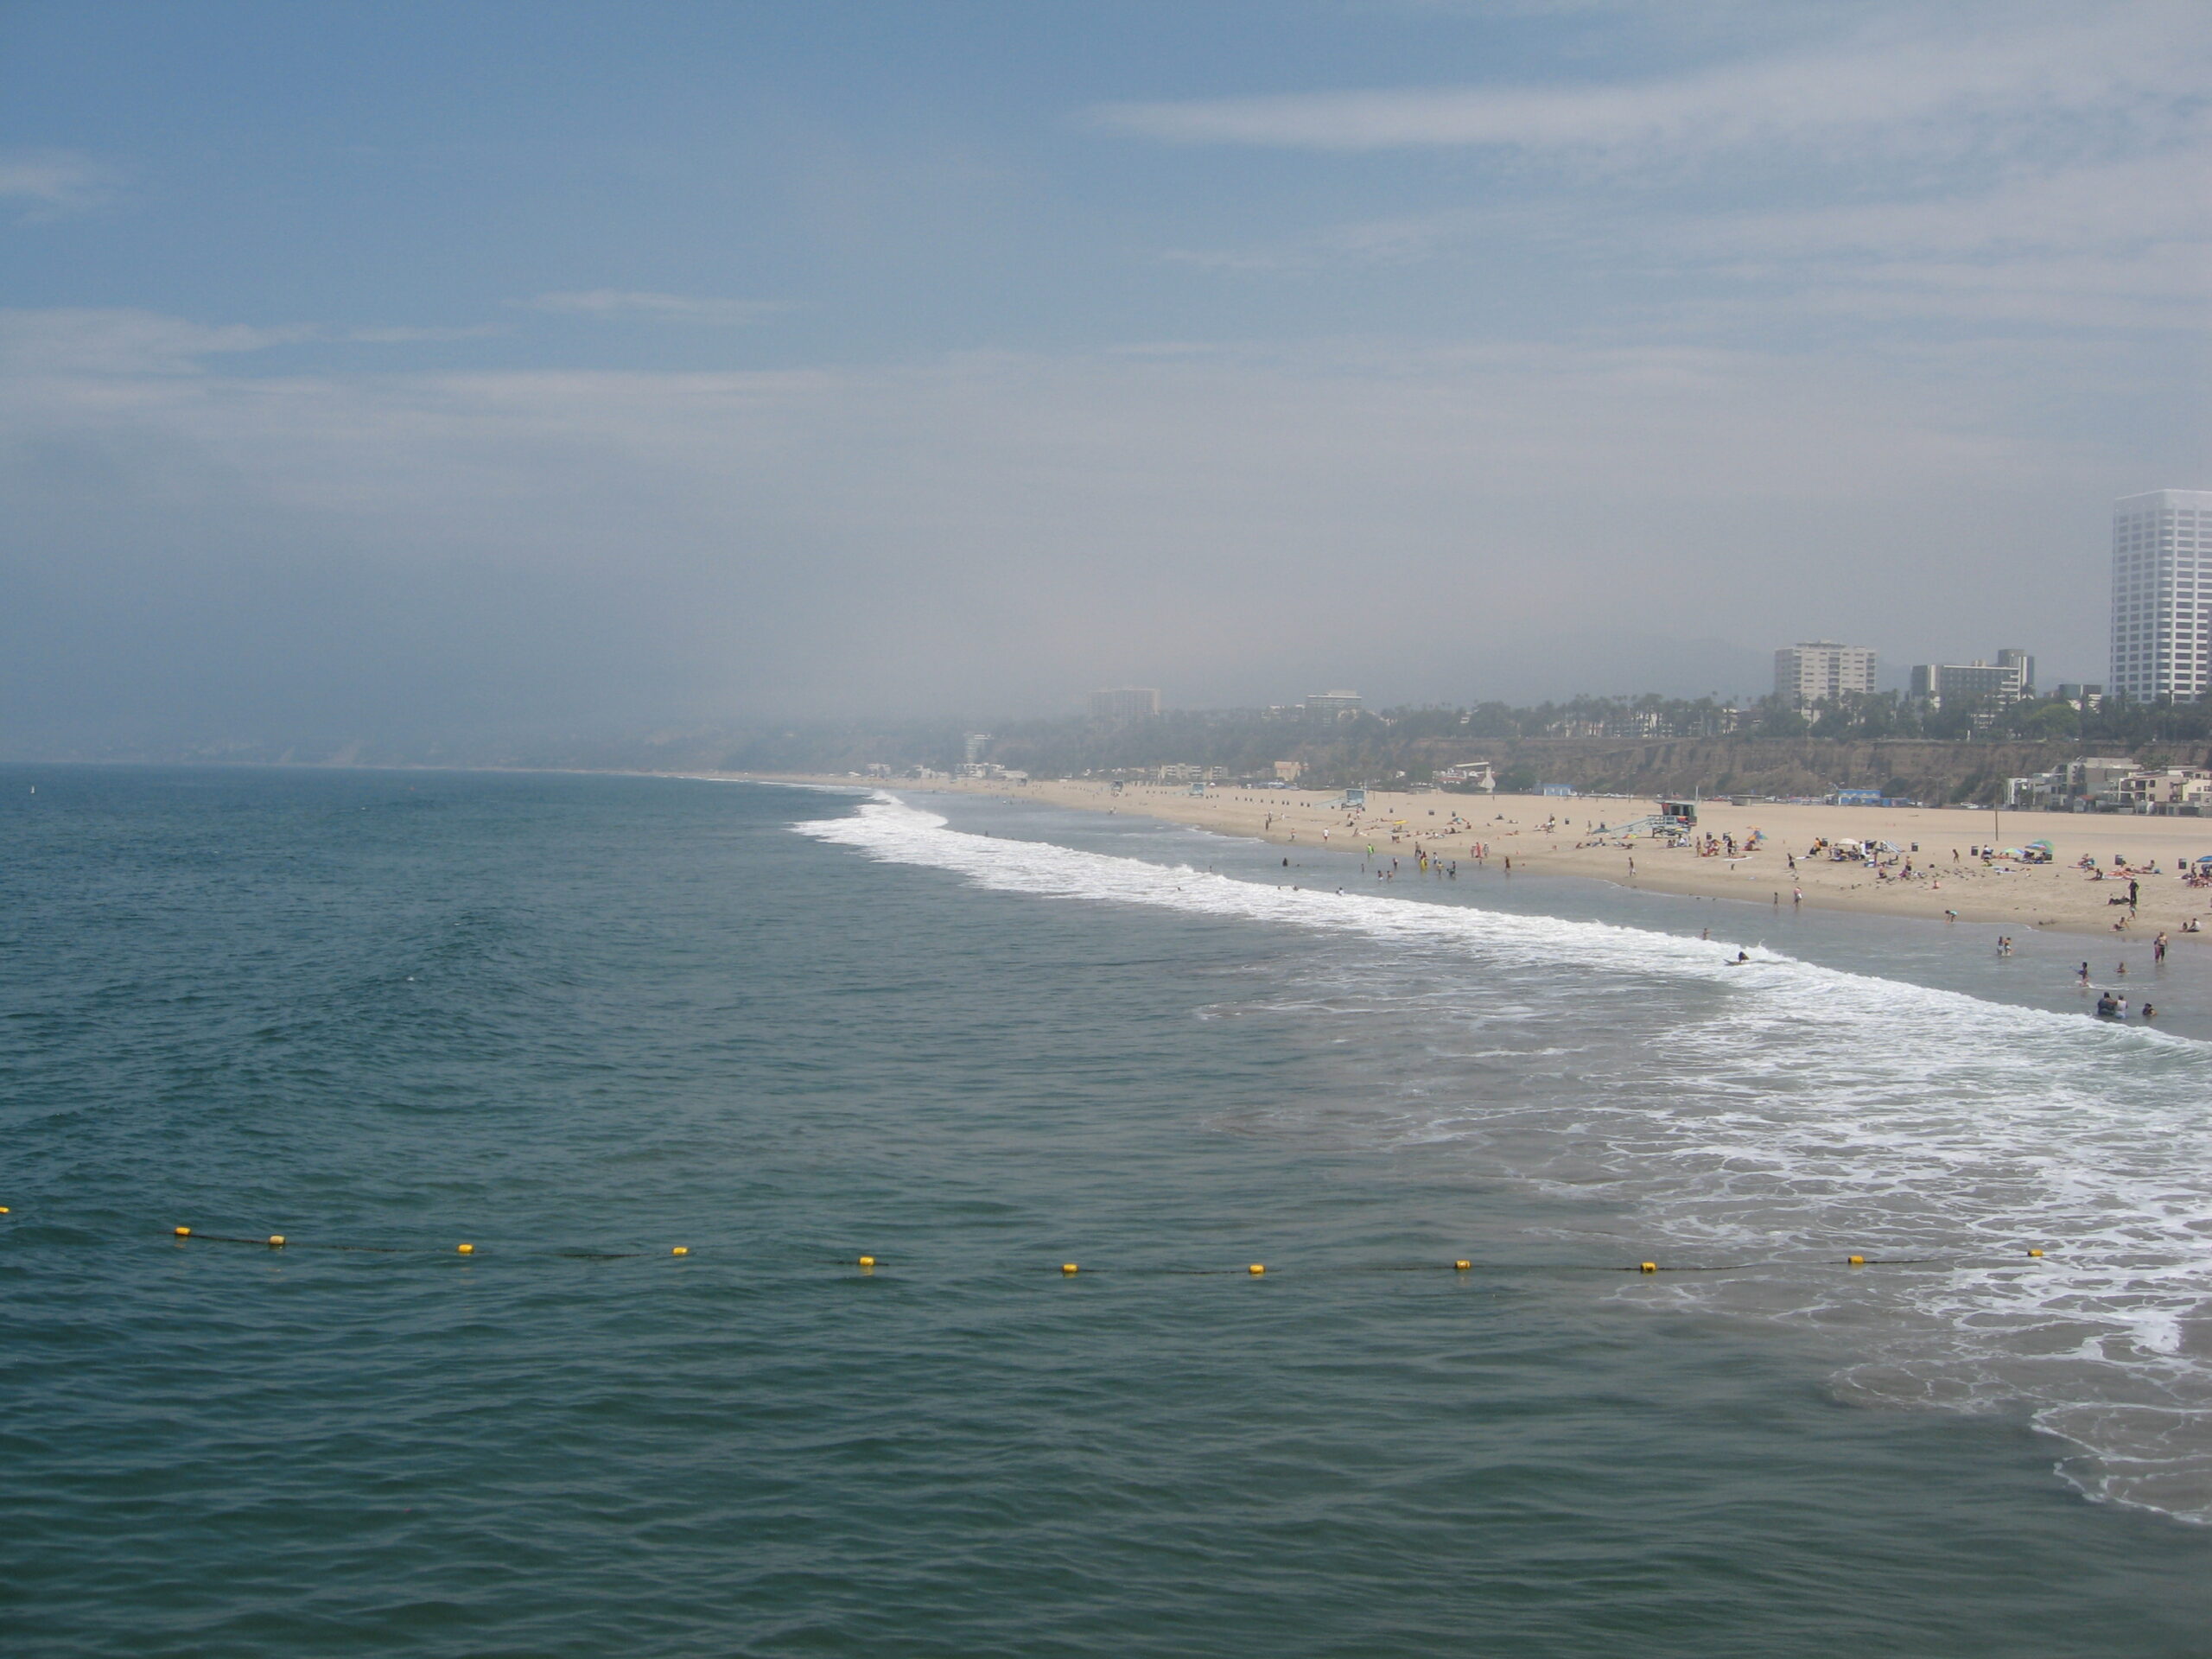 On August 6, Santa Monica beach was temporarily closed due to a mysterious substance, later identified as linoleic acid, washing up on the shore.